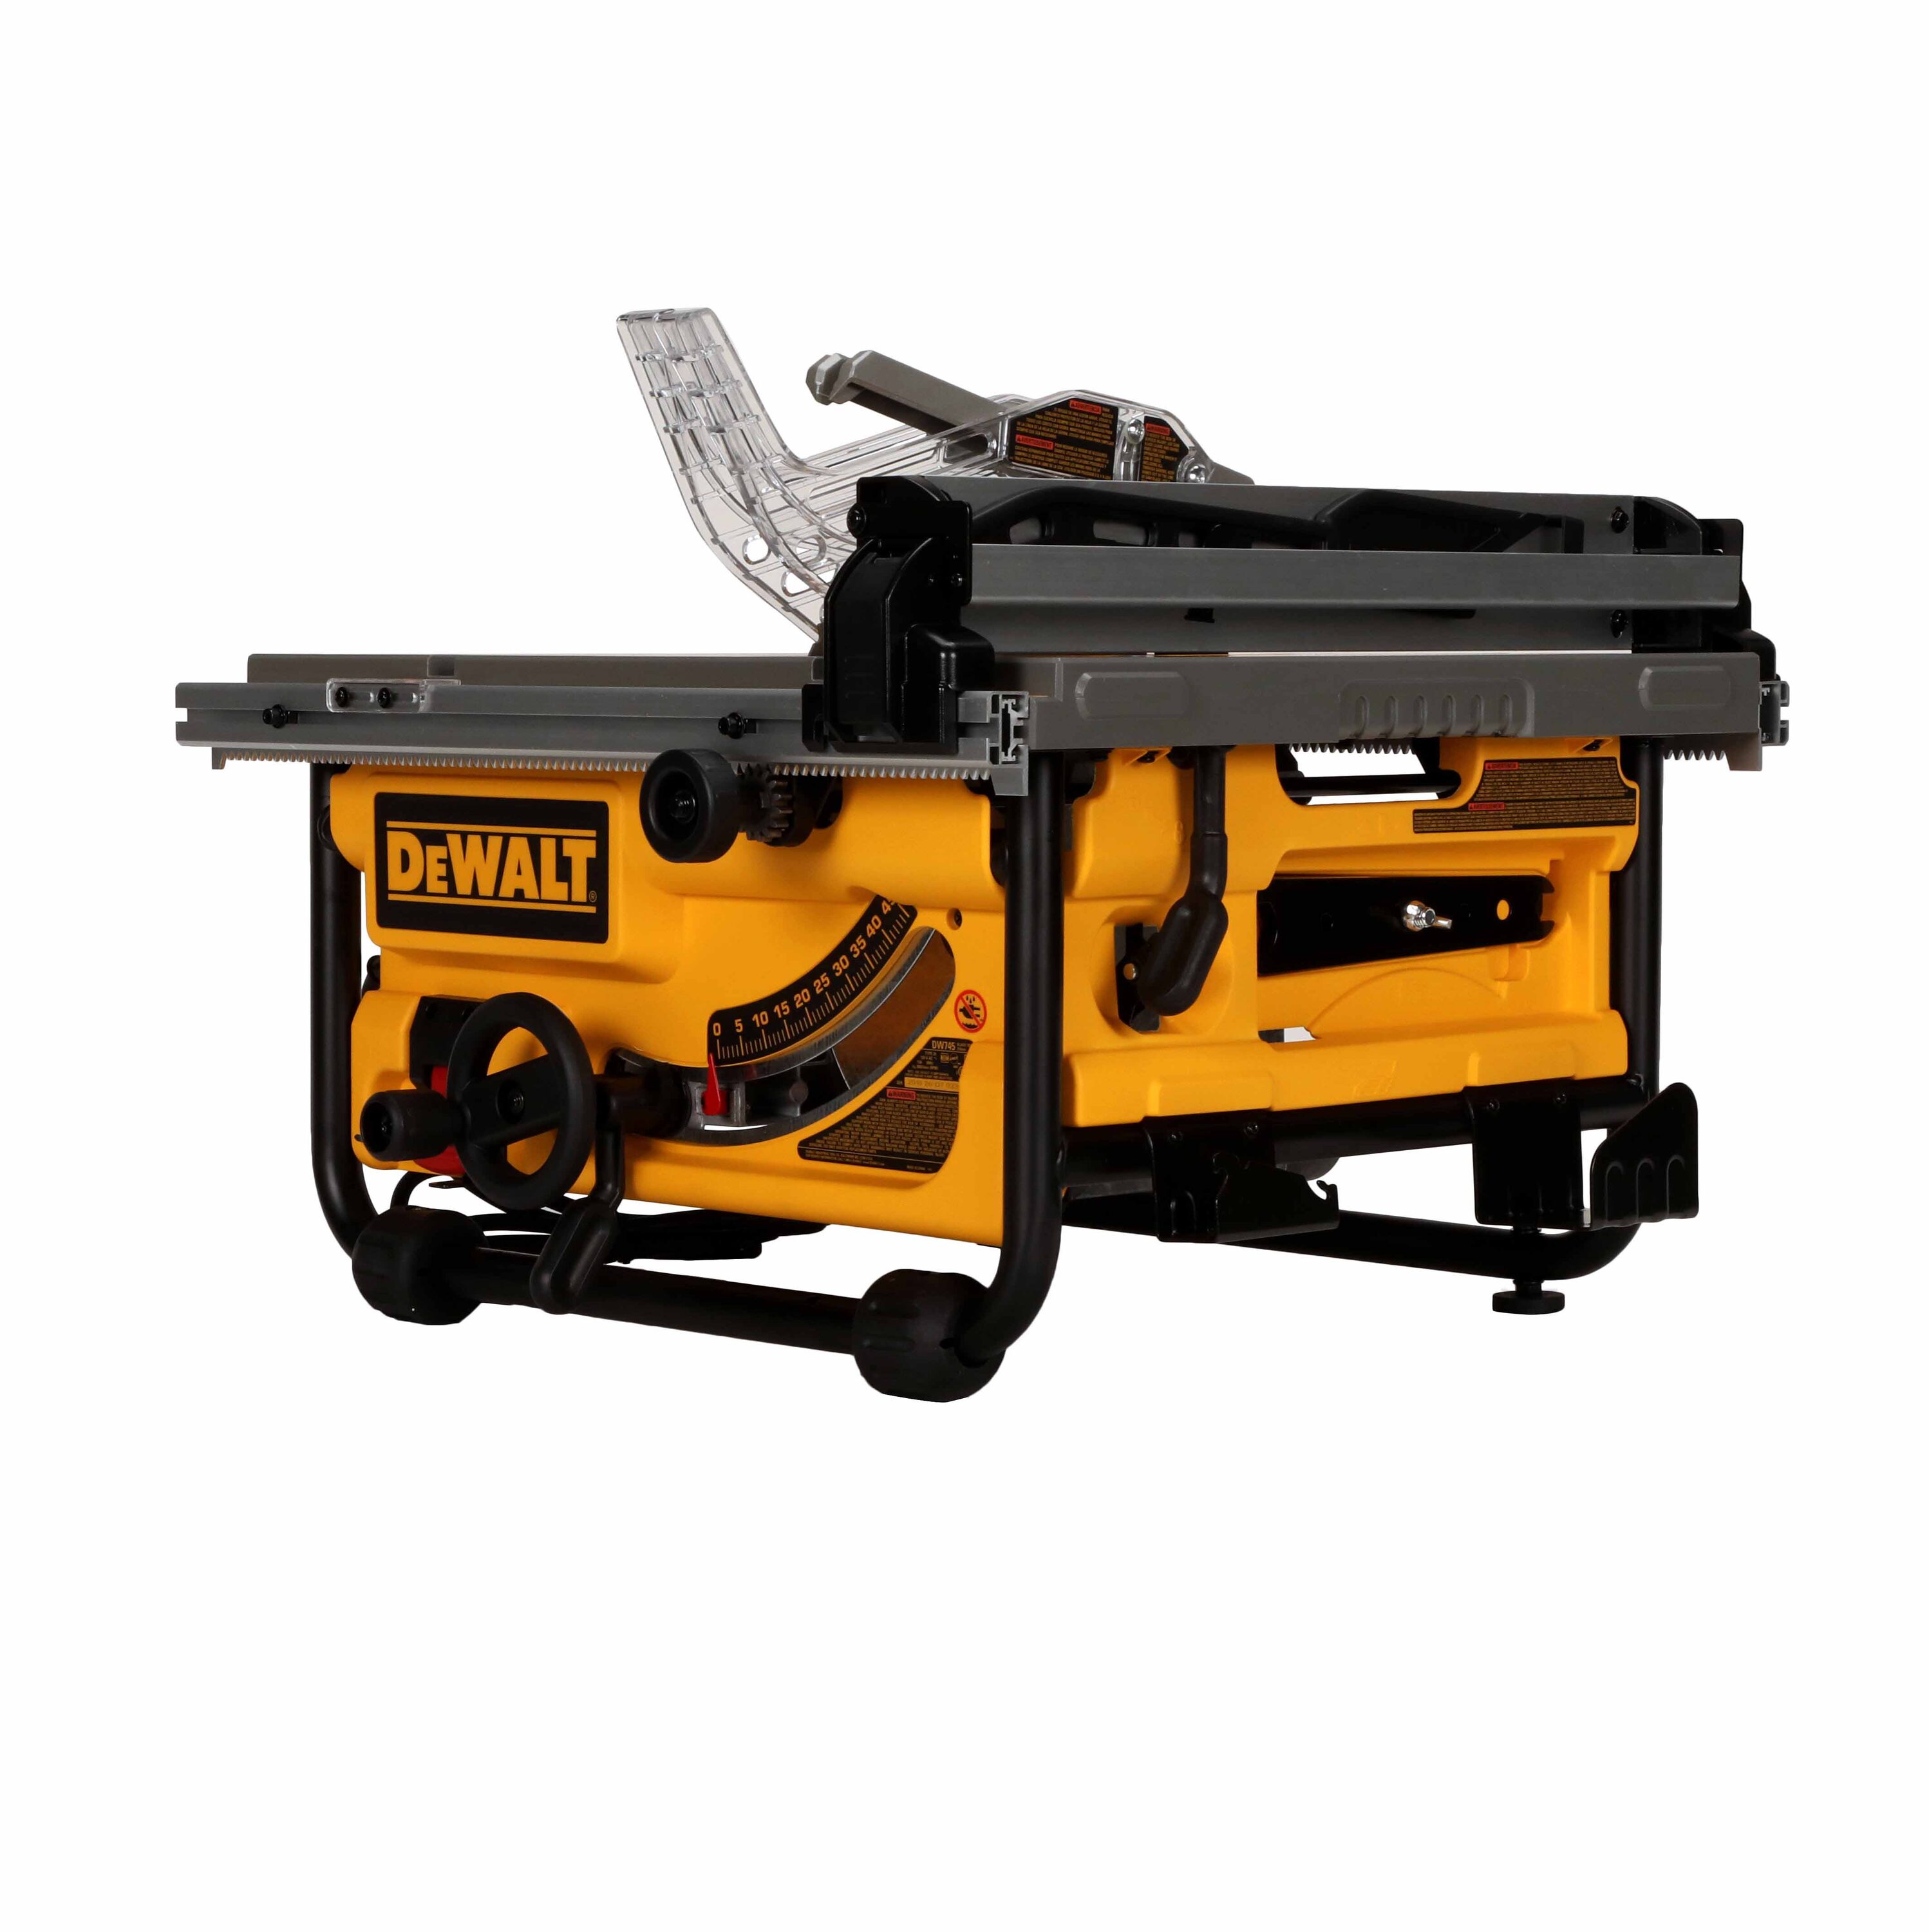 DEWALT 10-in 15-Amp Benchtop Table with Folding Stand the Table department at Lowes.com